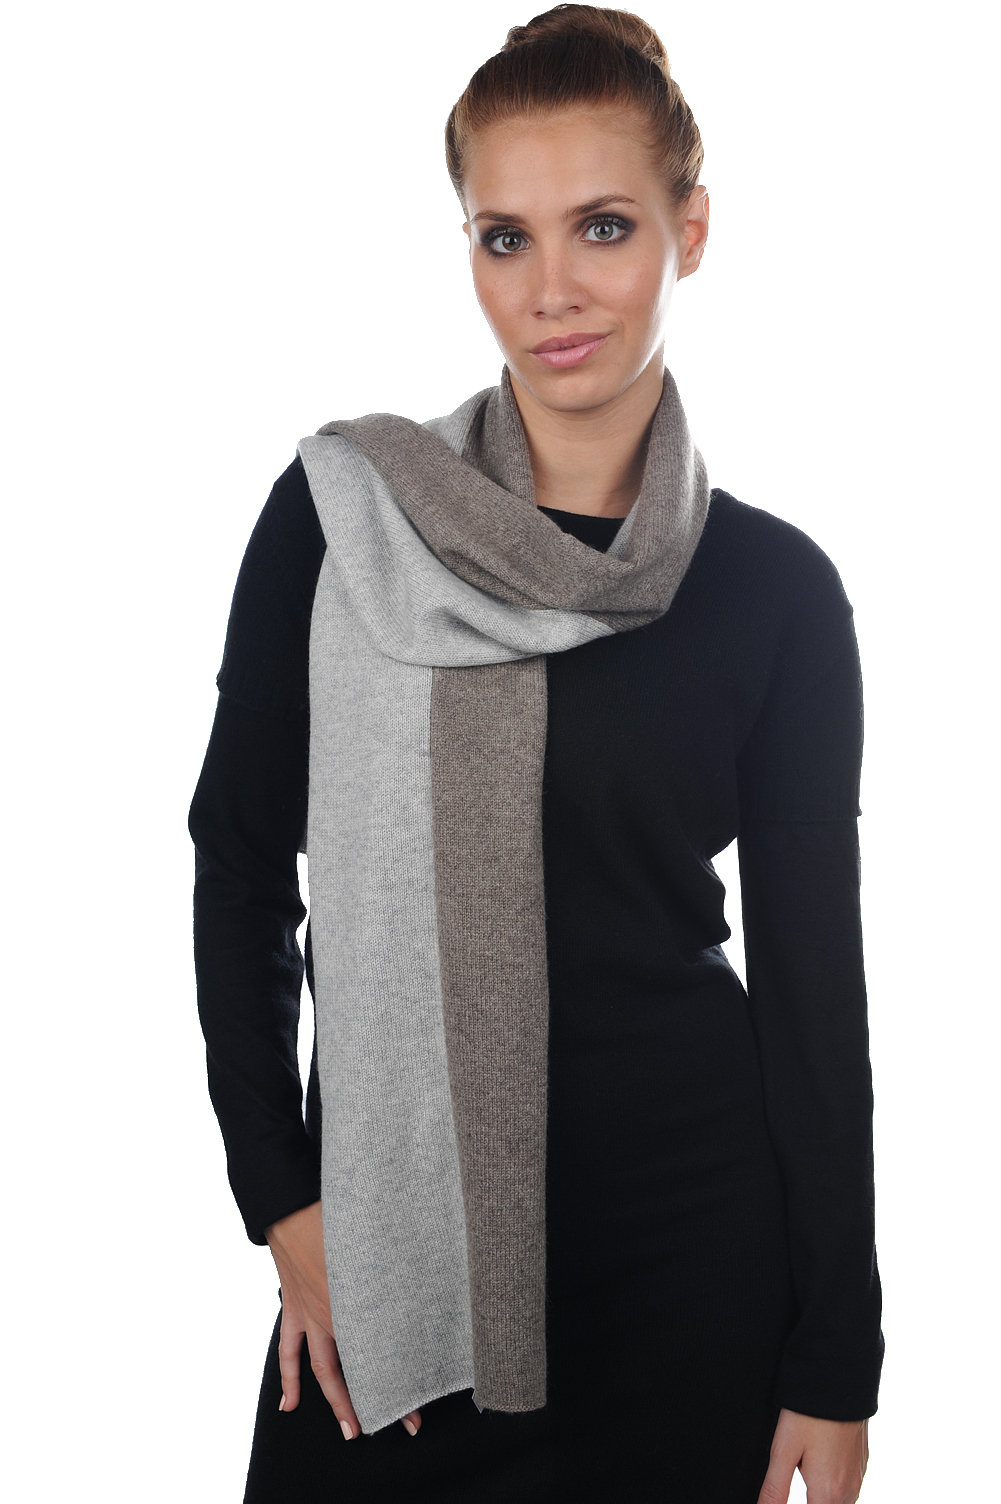 Cachemire et Yak pull homme echarpes et cheches luvo flanelle chine gris naturel 164 x 26 cm